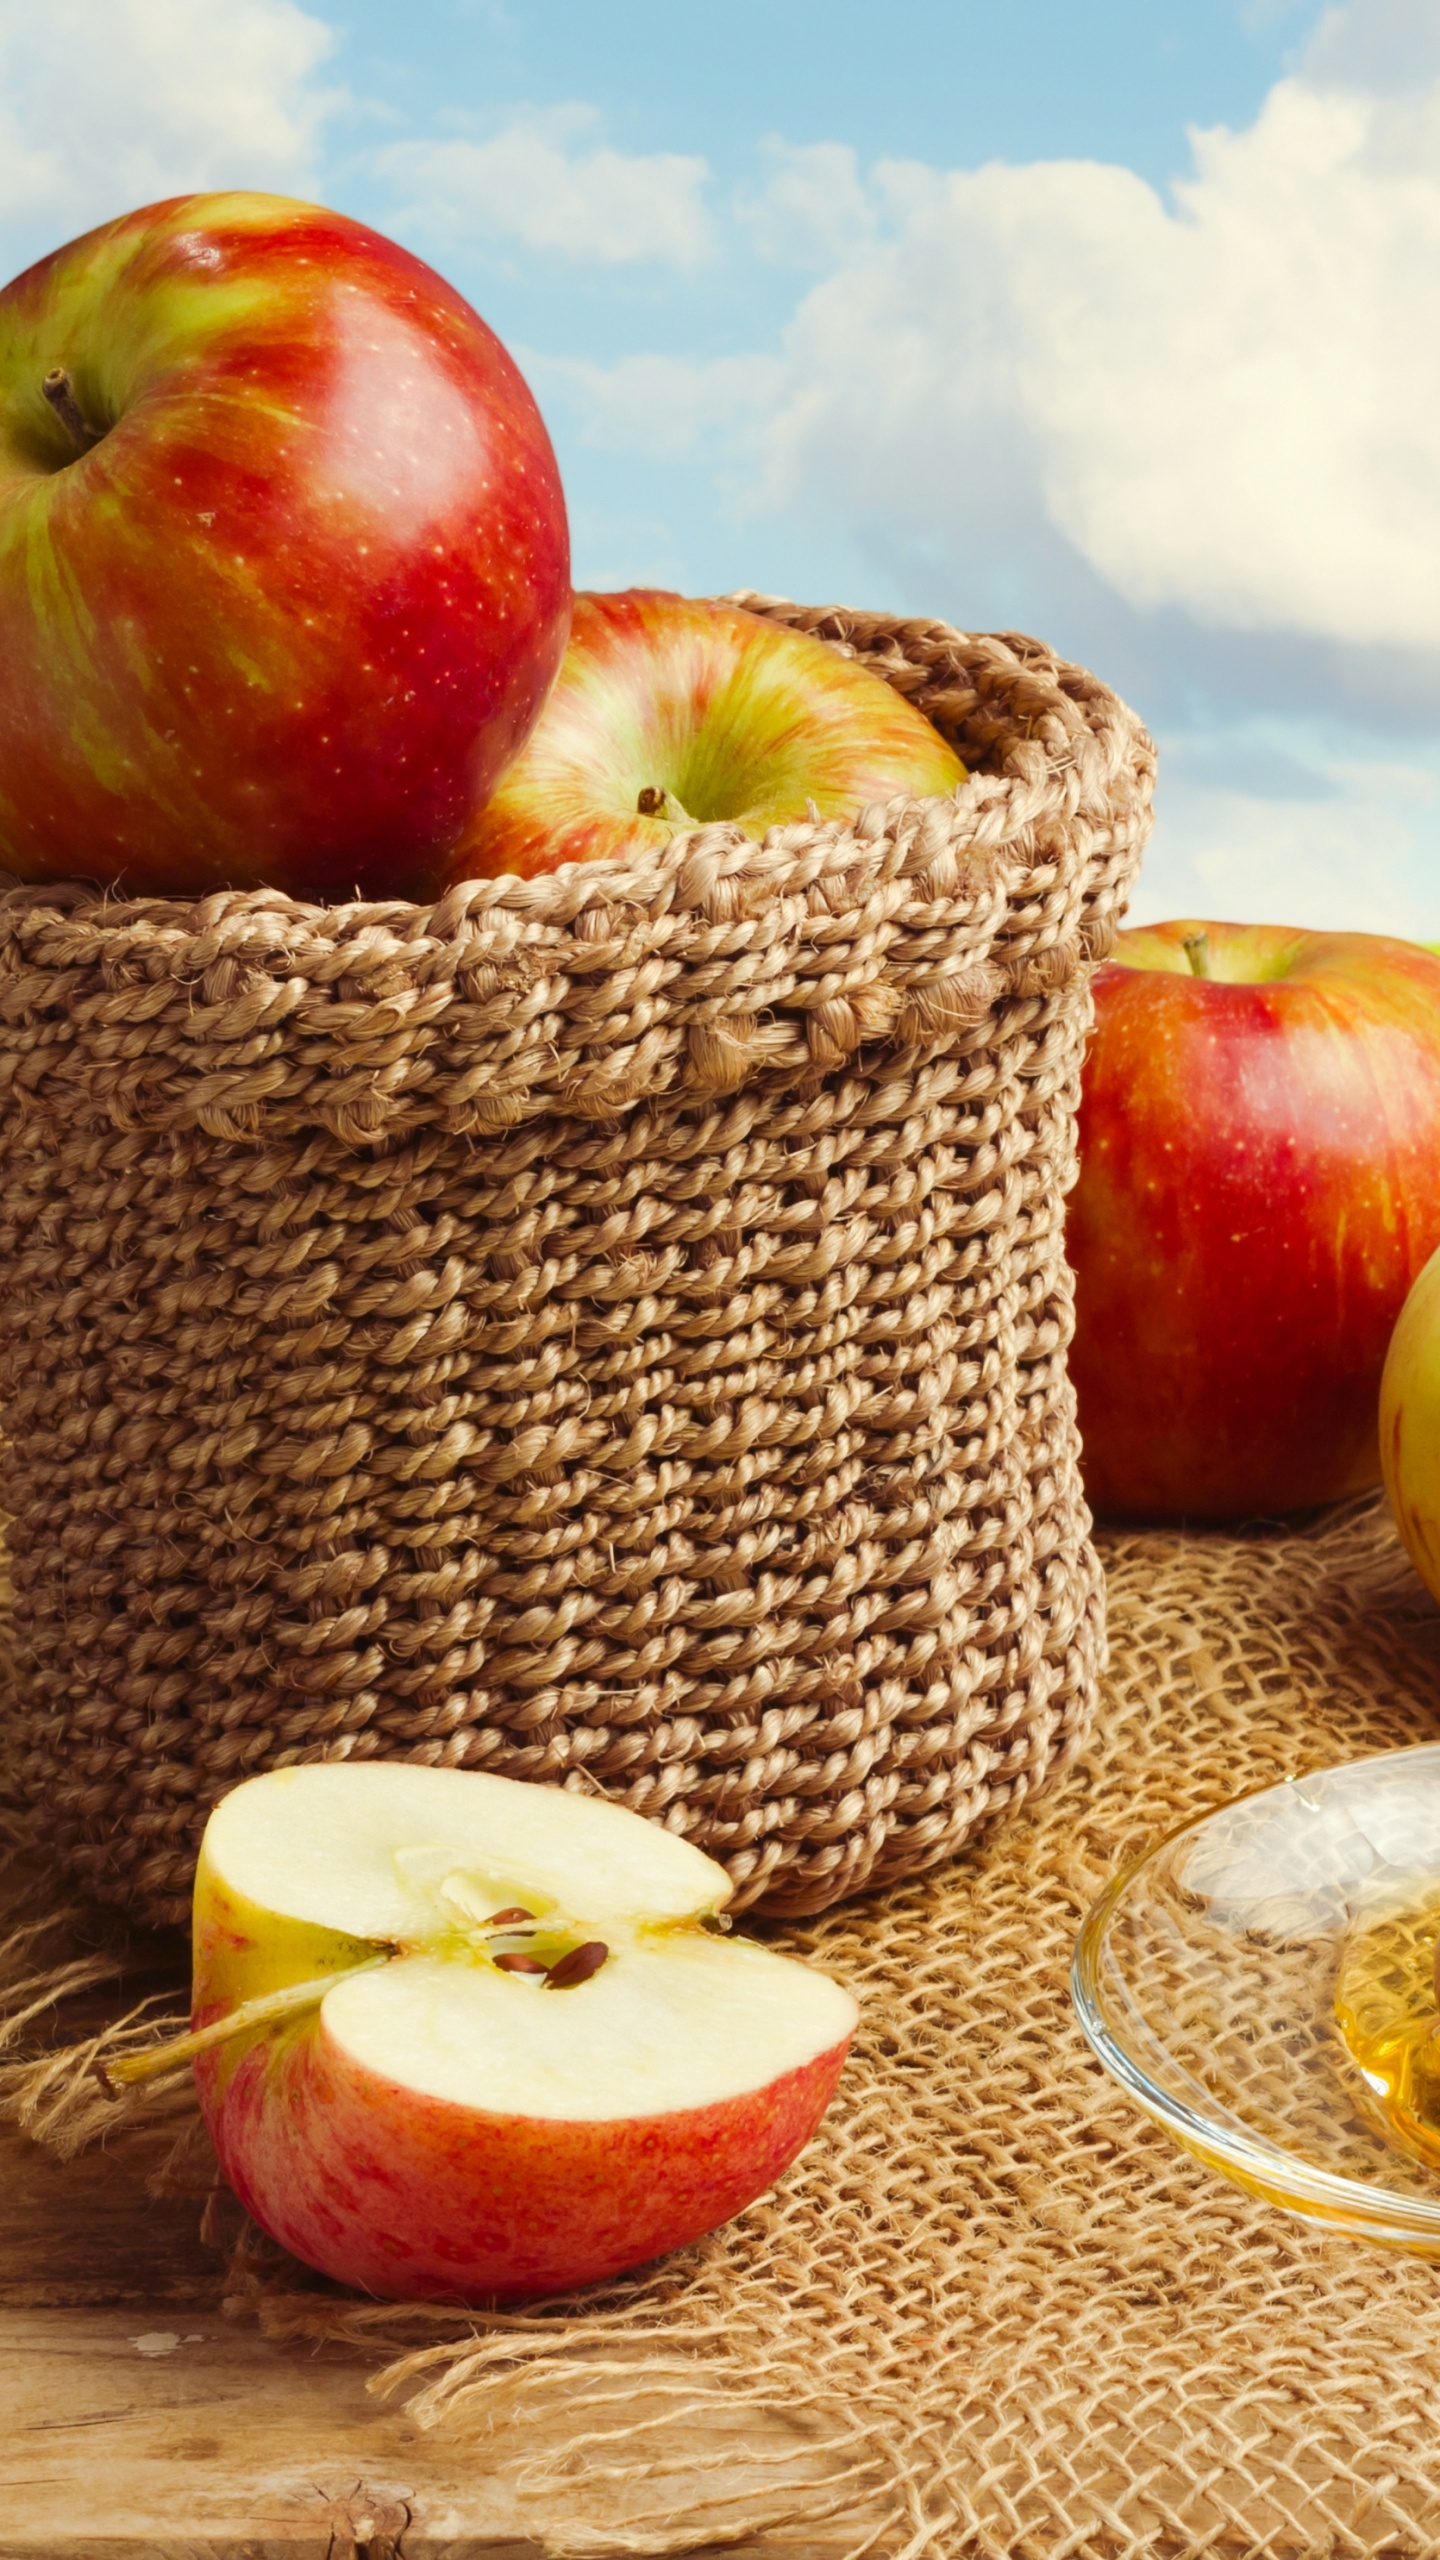 Red Apples on Brown Woven Basket. Wallpaper in 1440x2560 Resolution